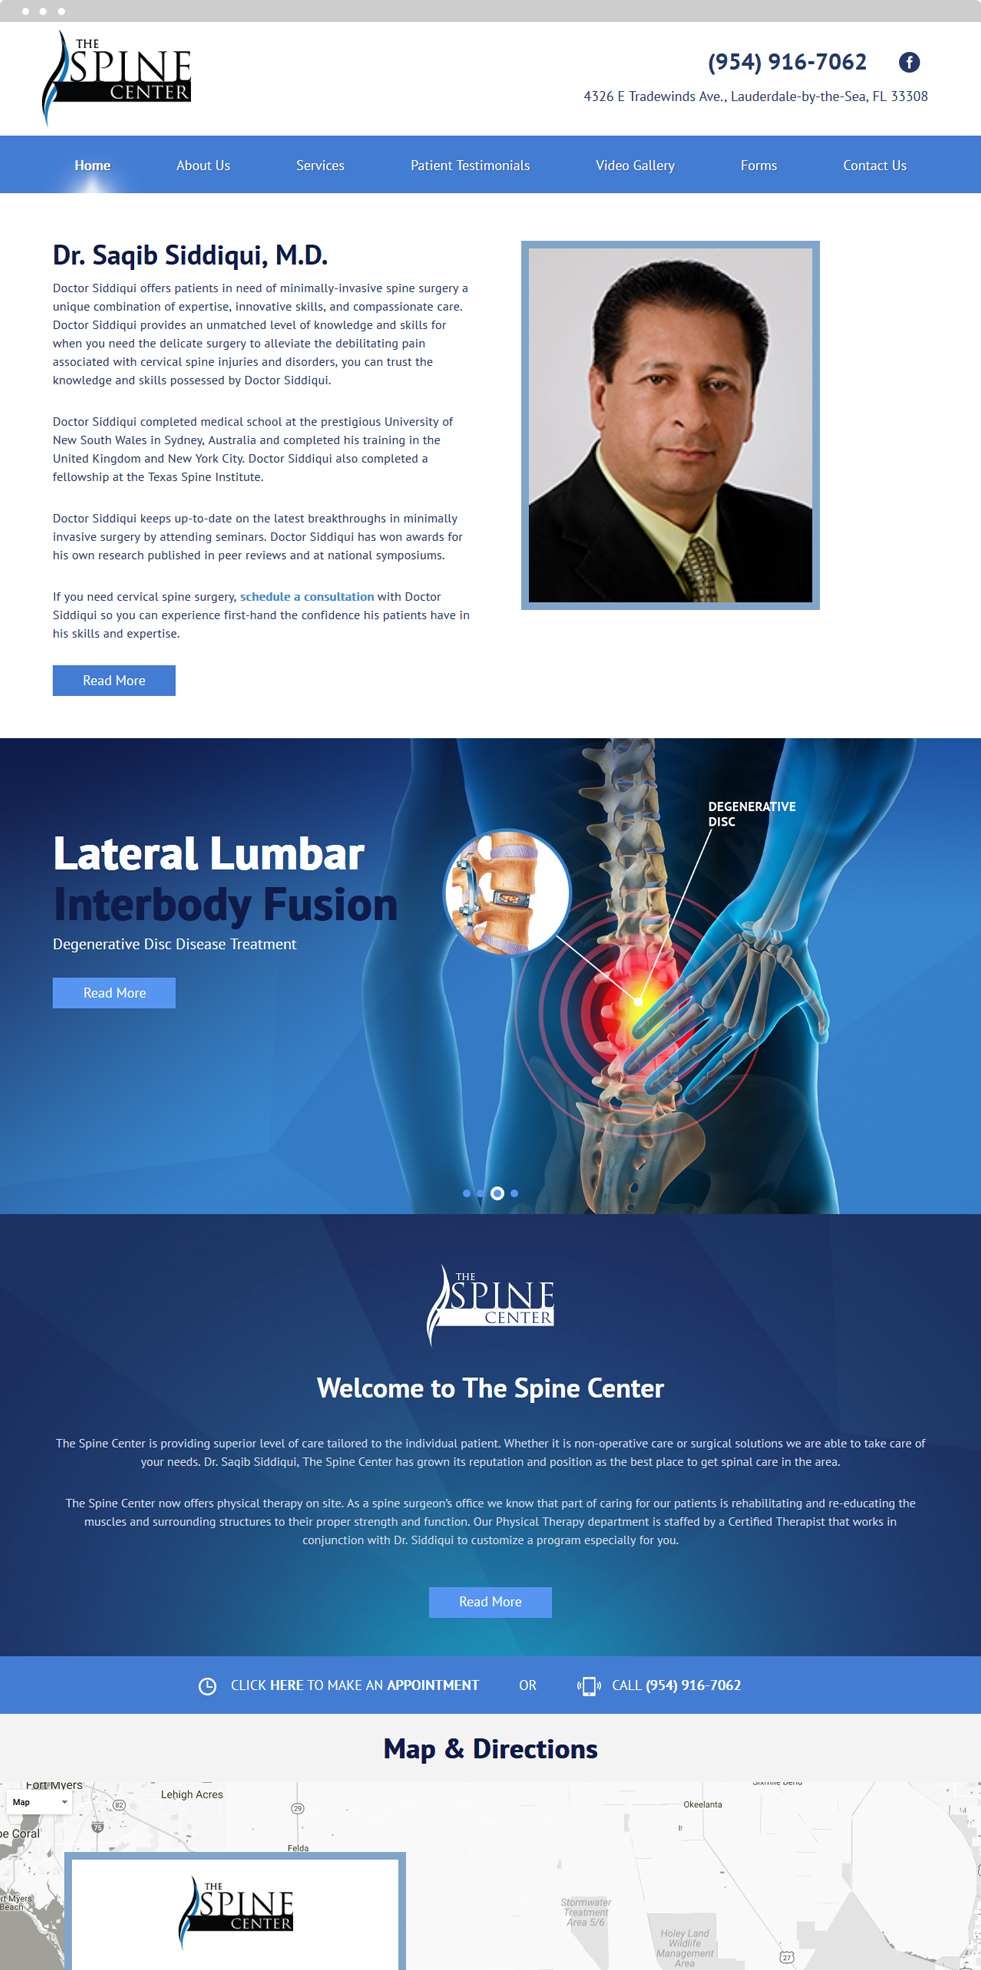 Surgery Website Design - The Spine Center - Homepage